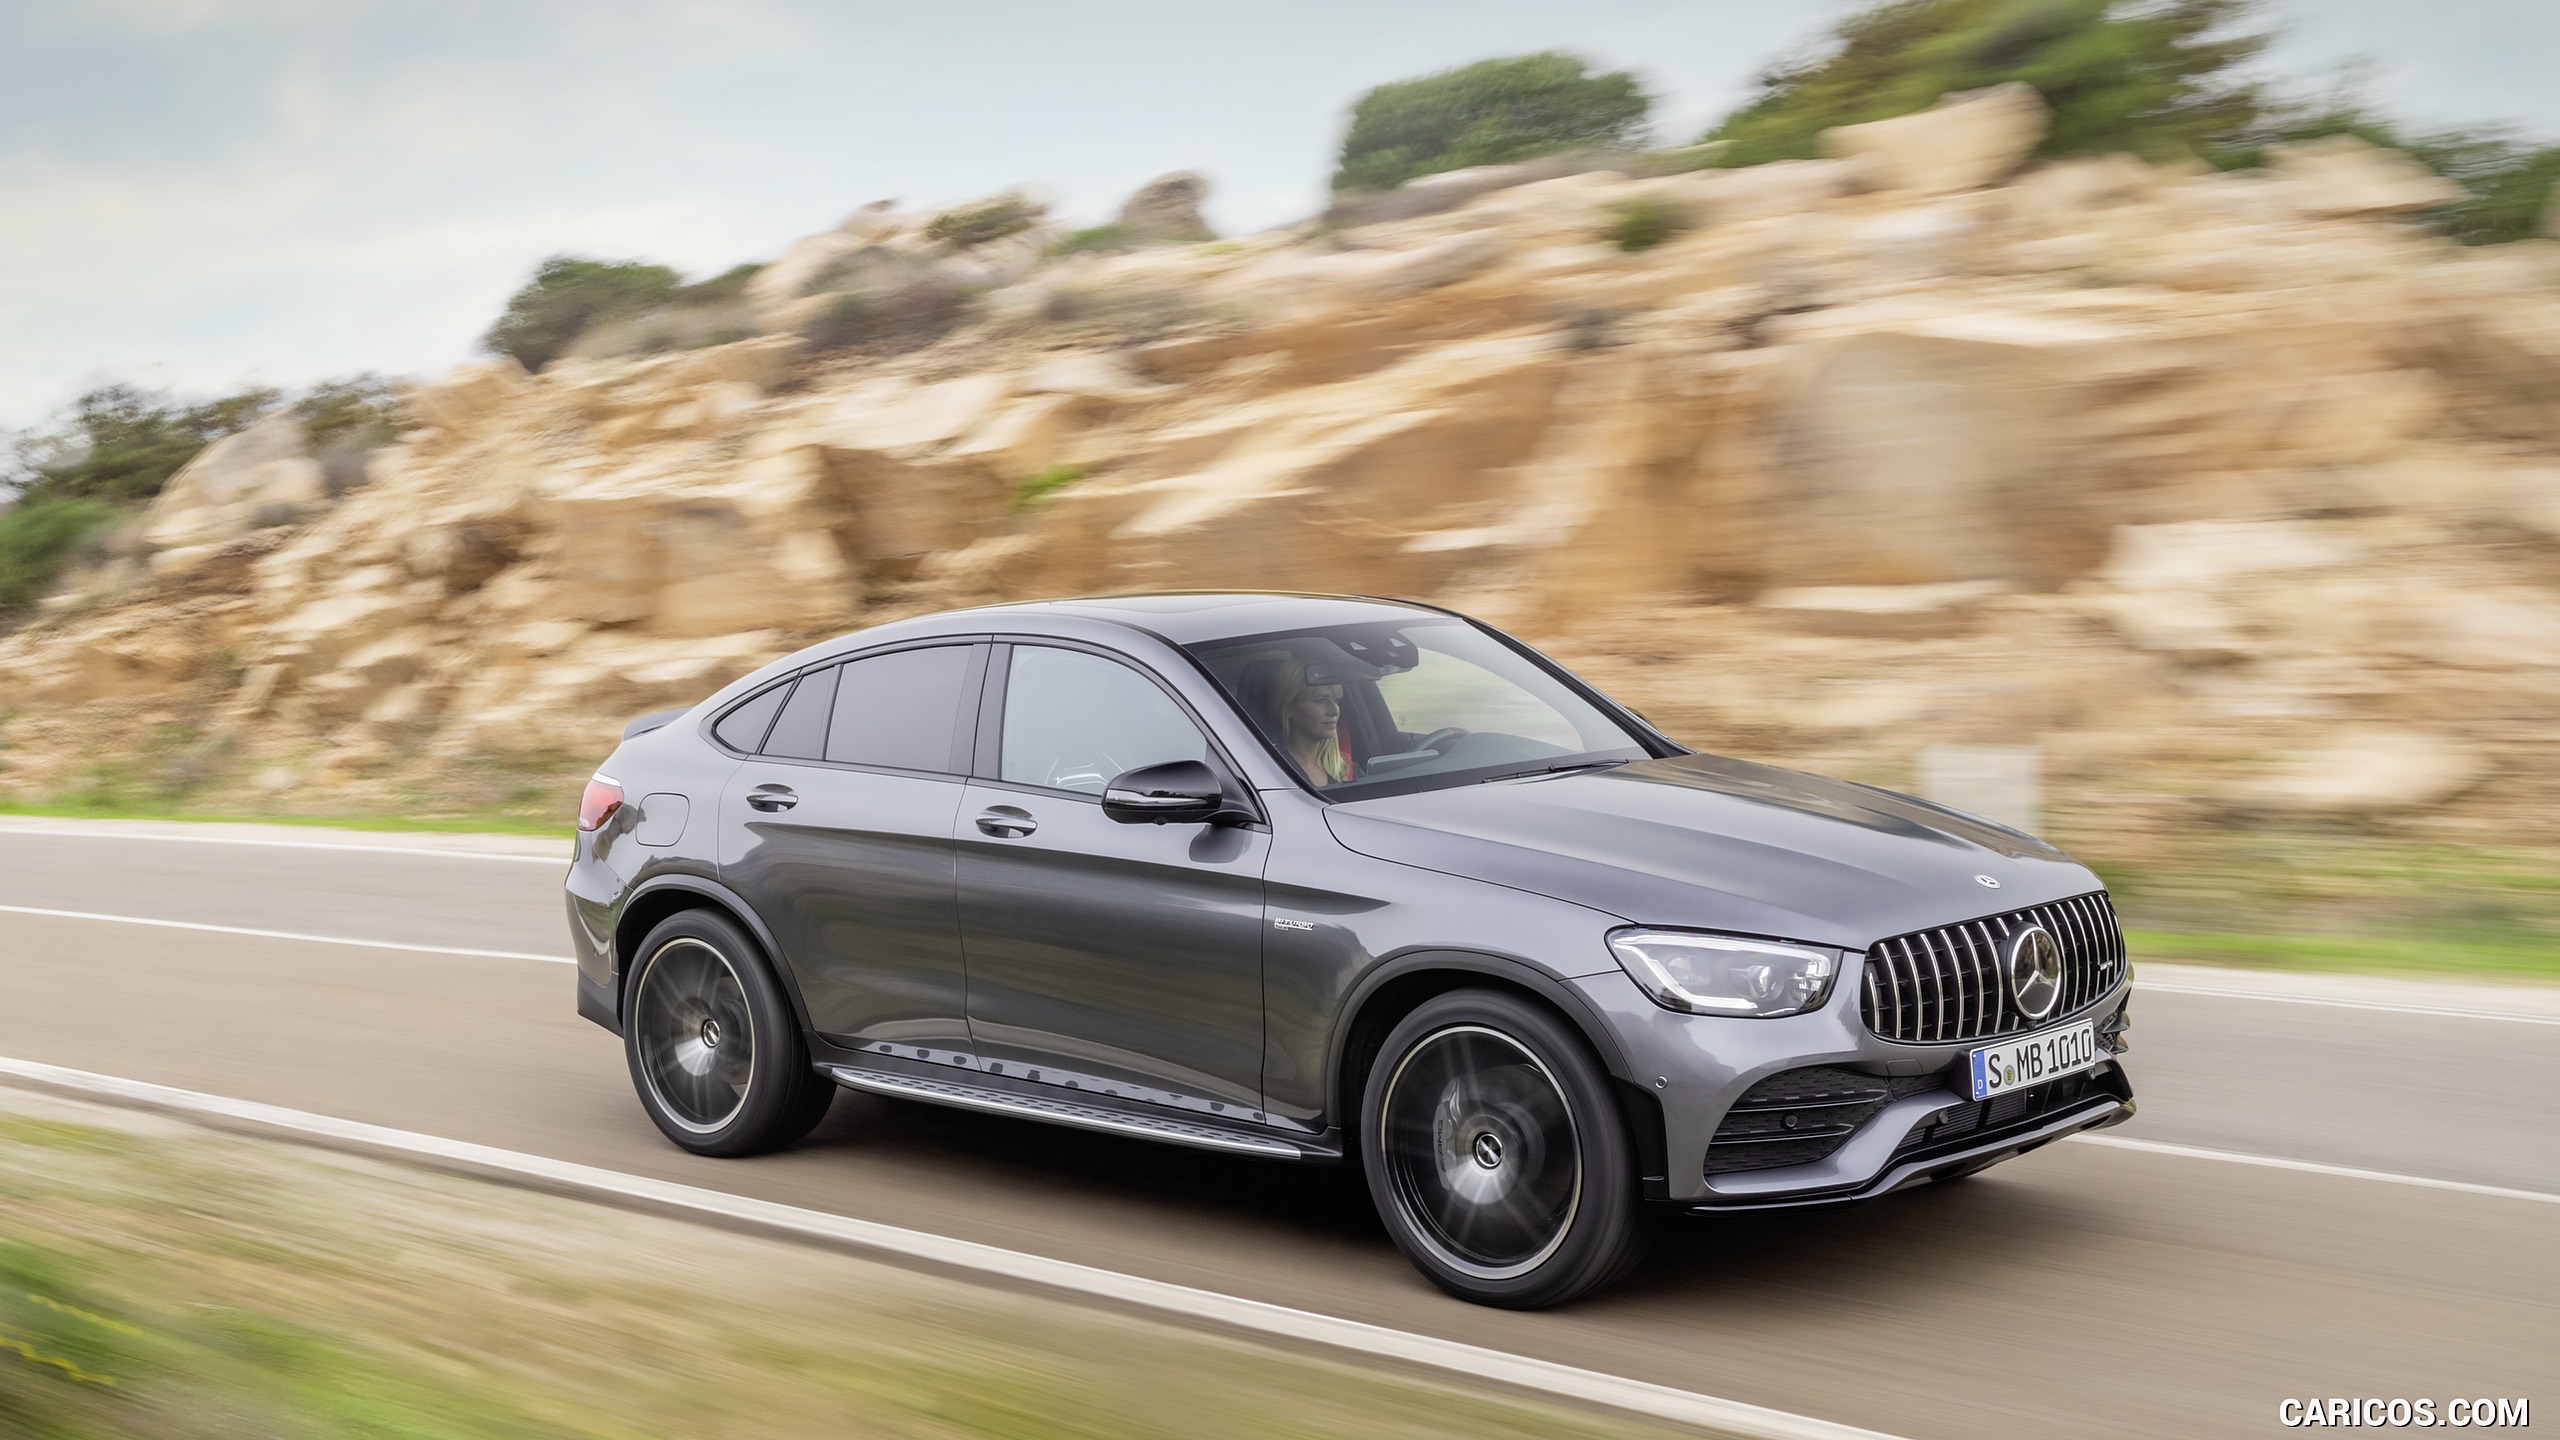 2020 Mercedes-AMG GLC 43 4MATIC Coupe - Front Three-Quarter, #6 of 173